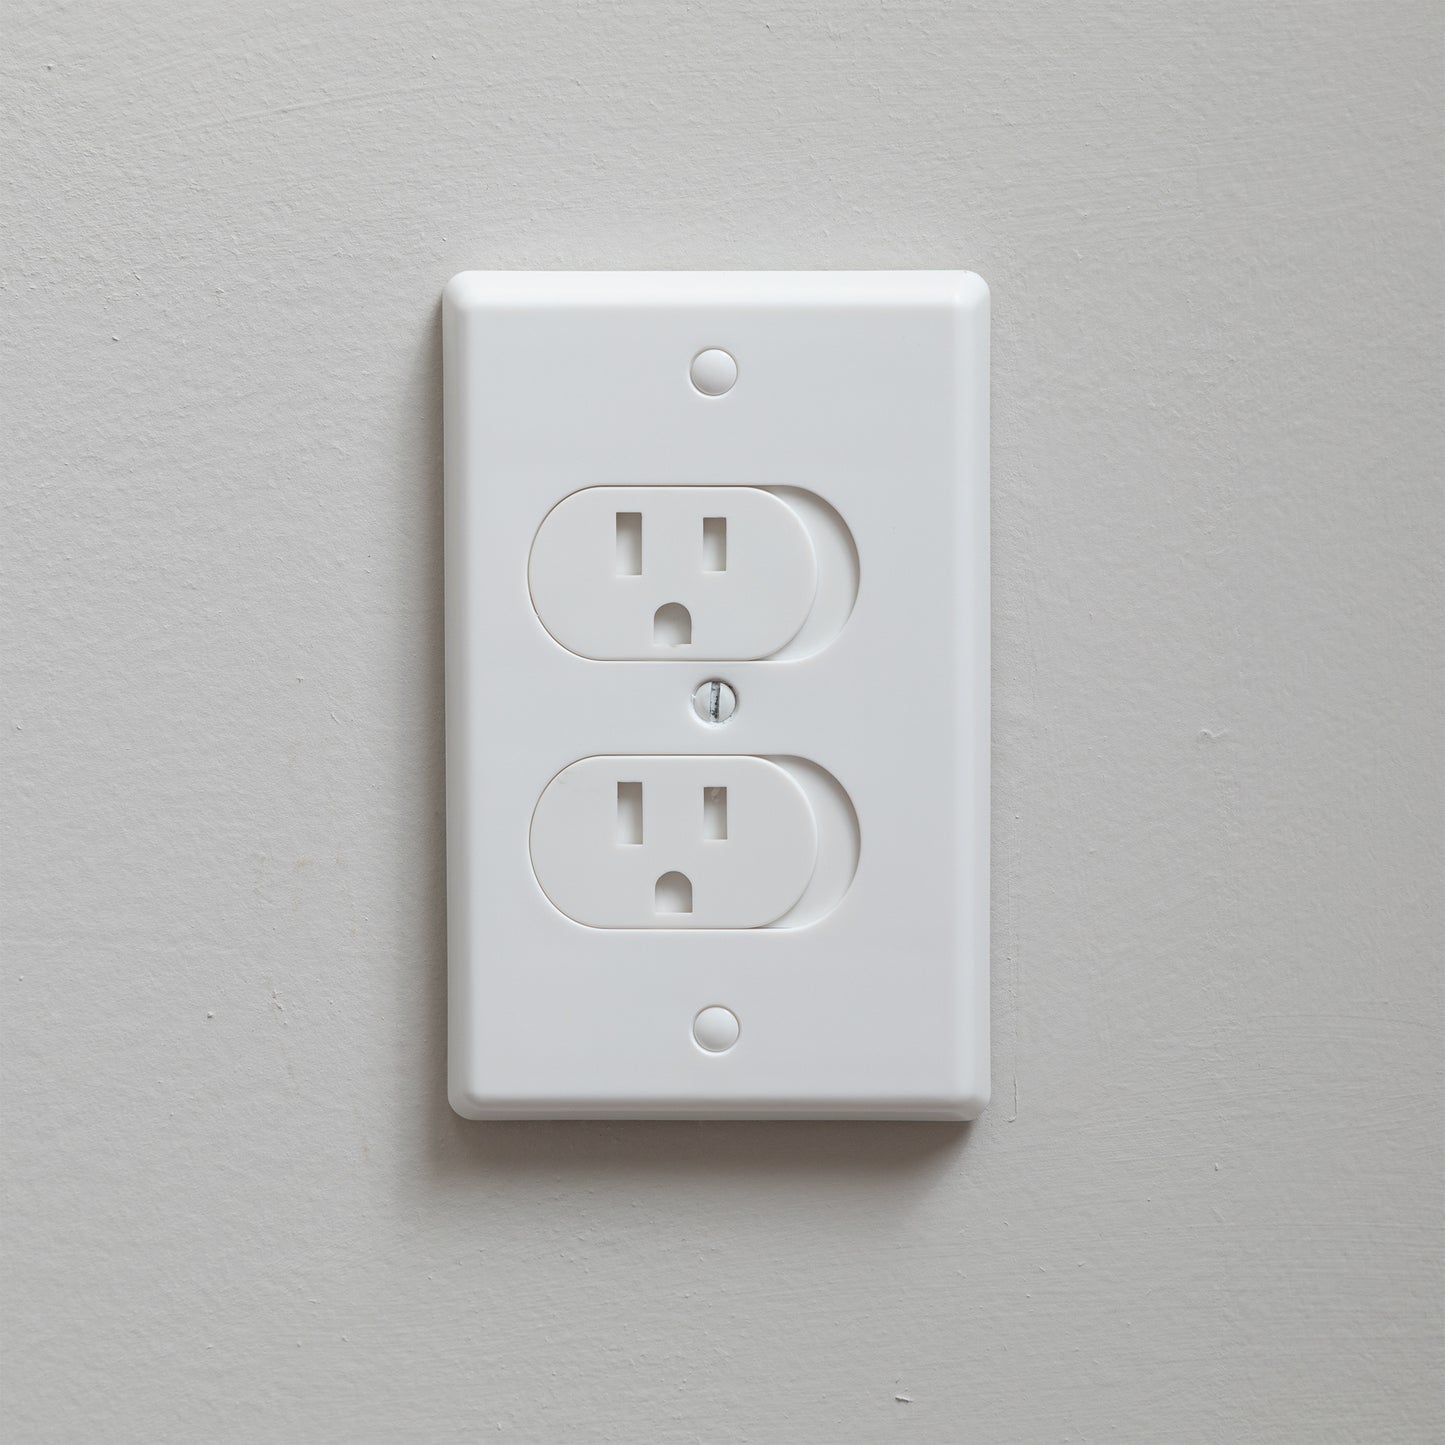 Qdos Universal Self-Closing Outlet Cover, 3 Pack